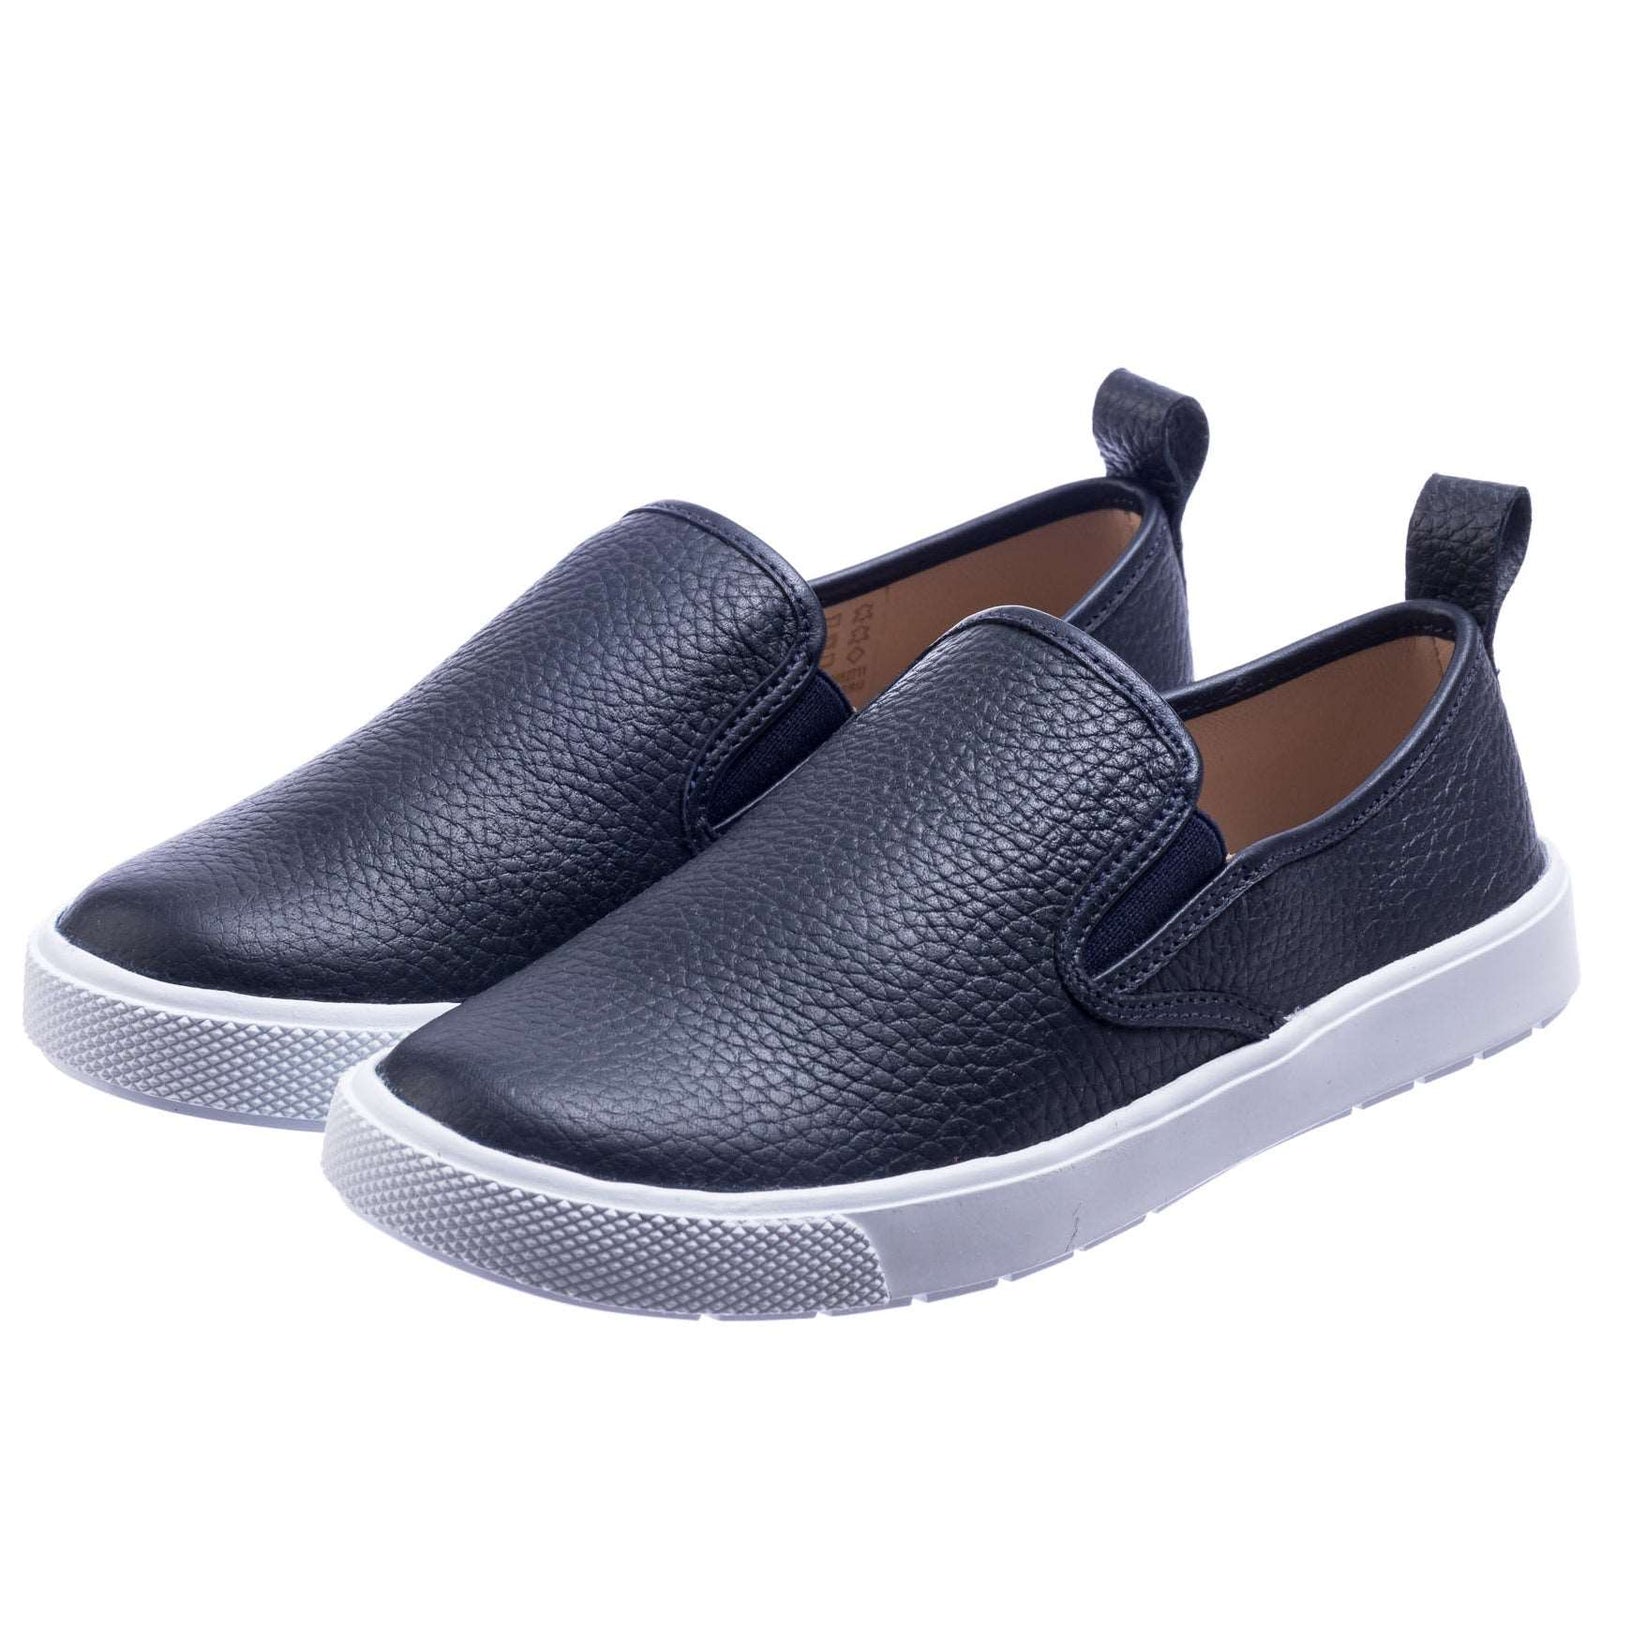 Durable and classic leather school shoes for boys – Elephantito